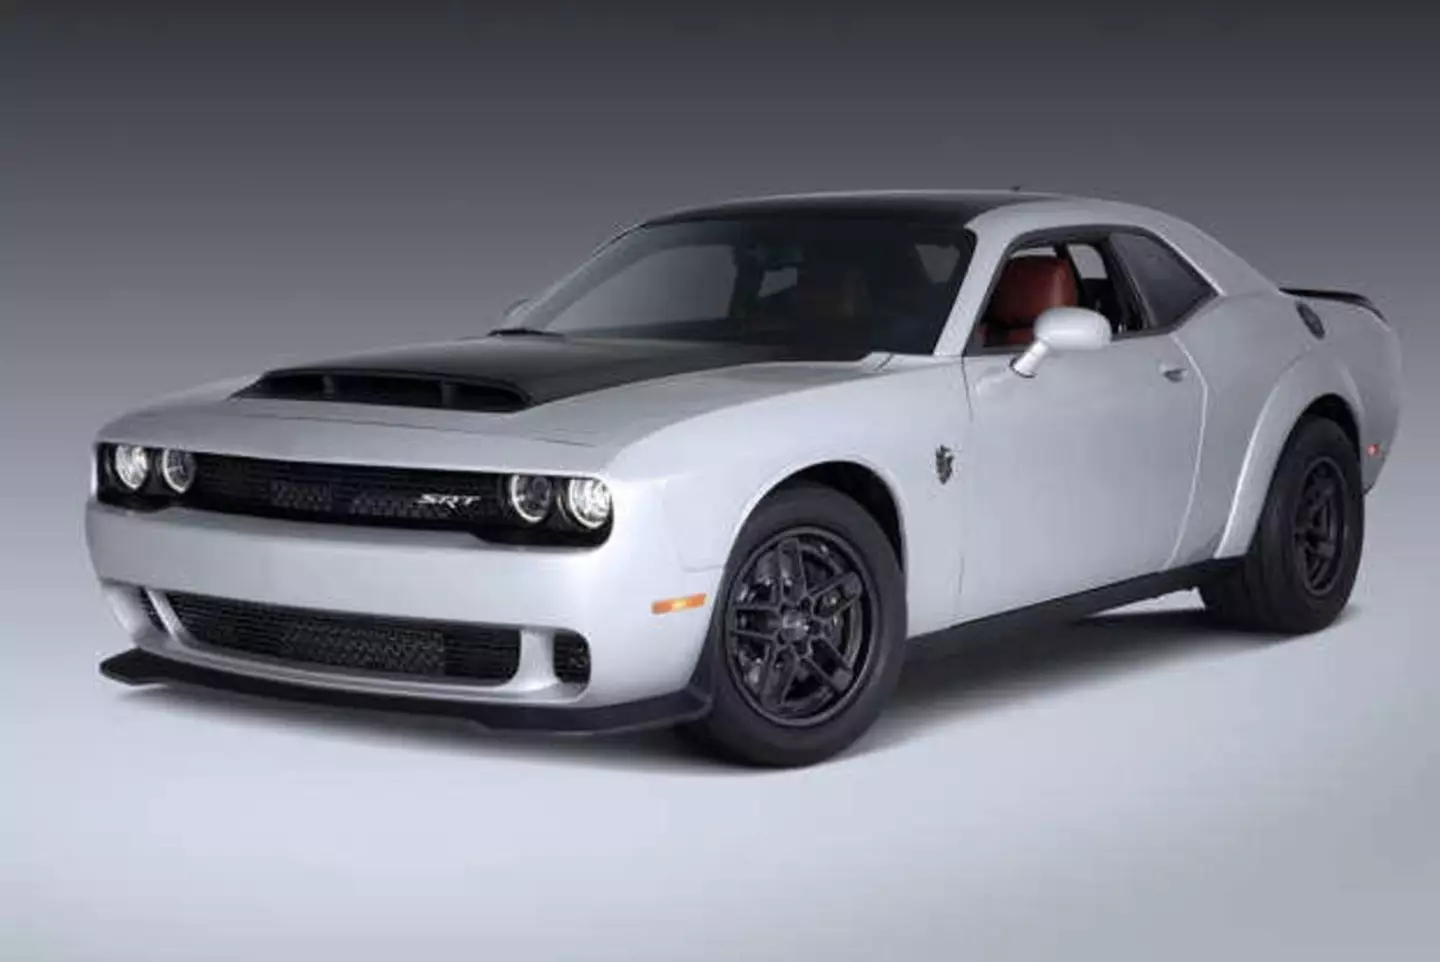 The last ever Dodge muscle car.